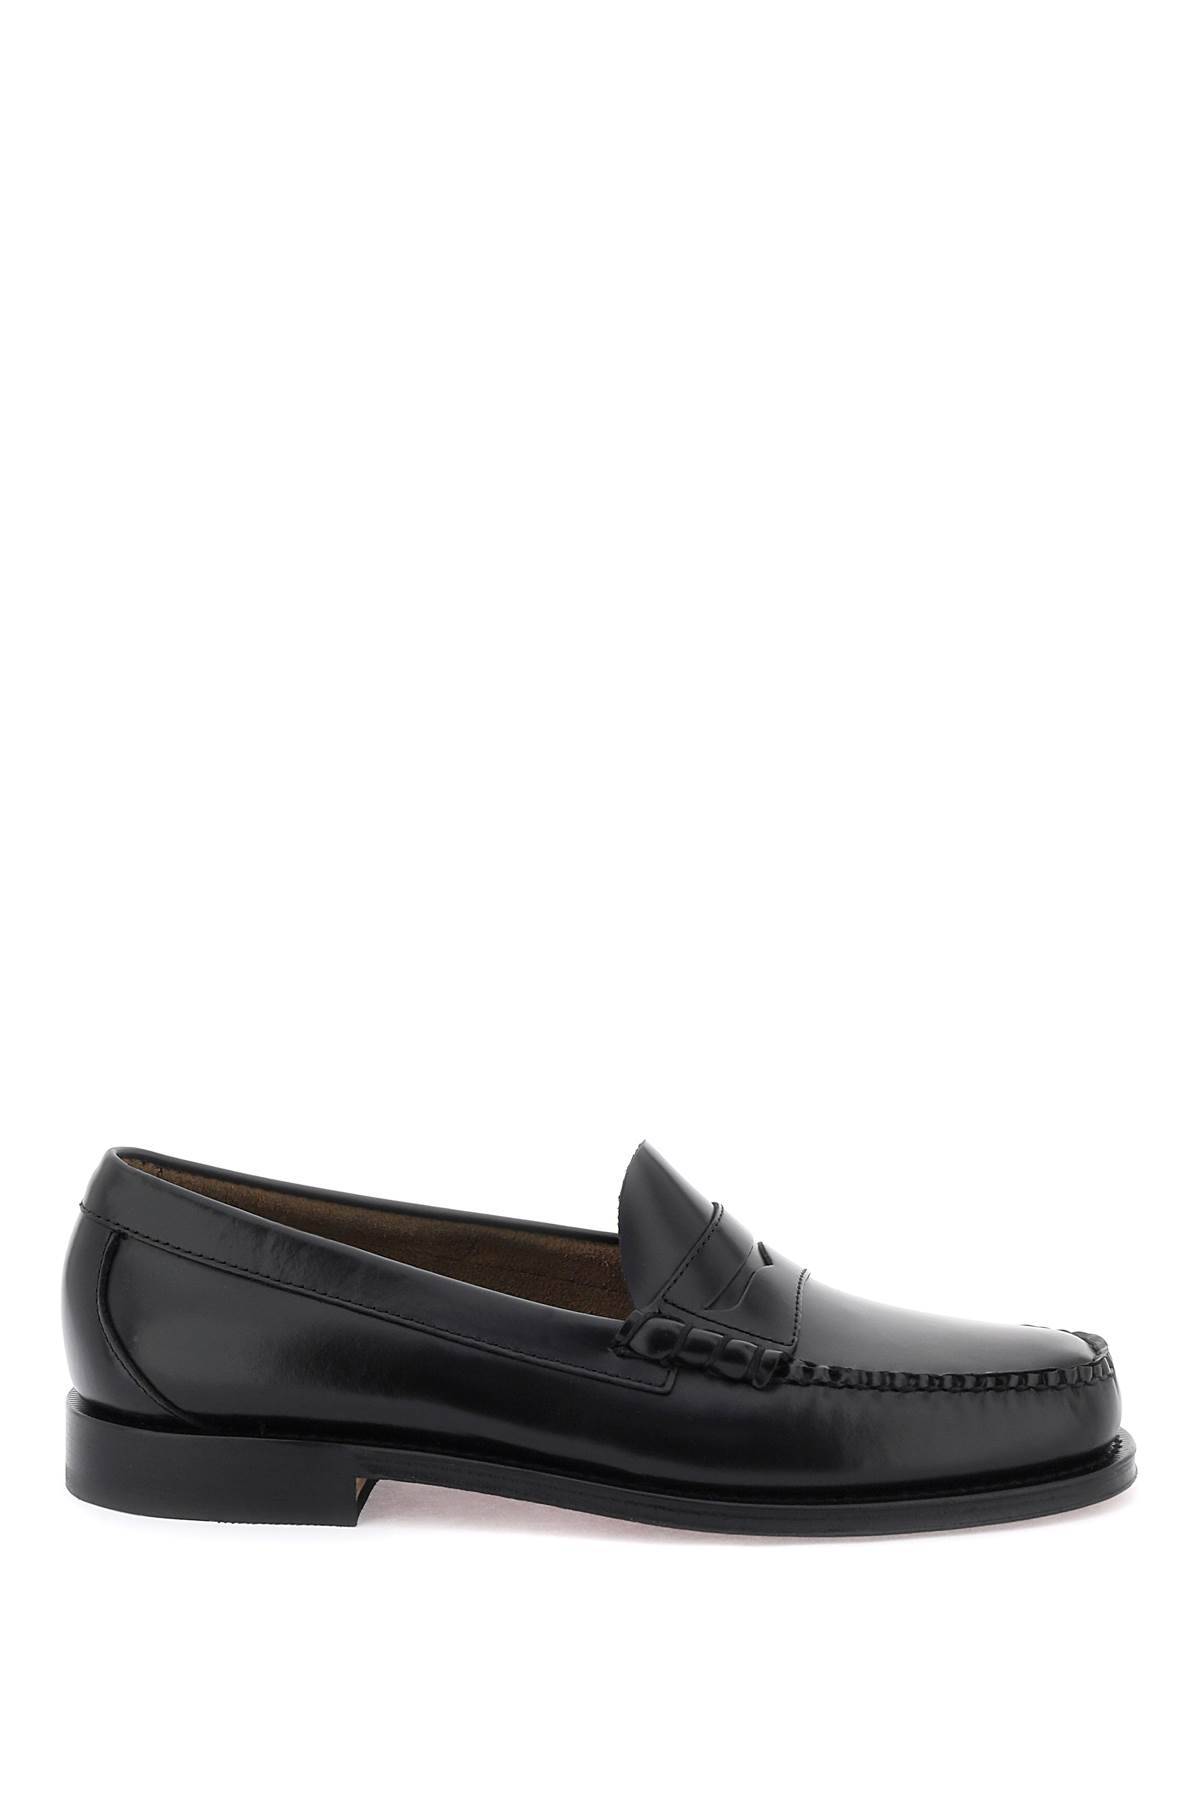 G.H. BASS G. H. BASS weejuns larson penny loafers